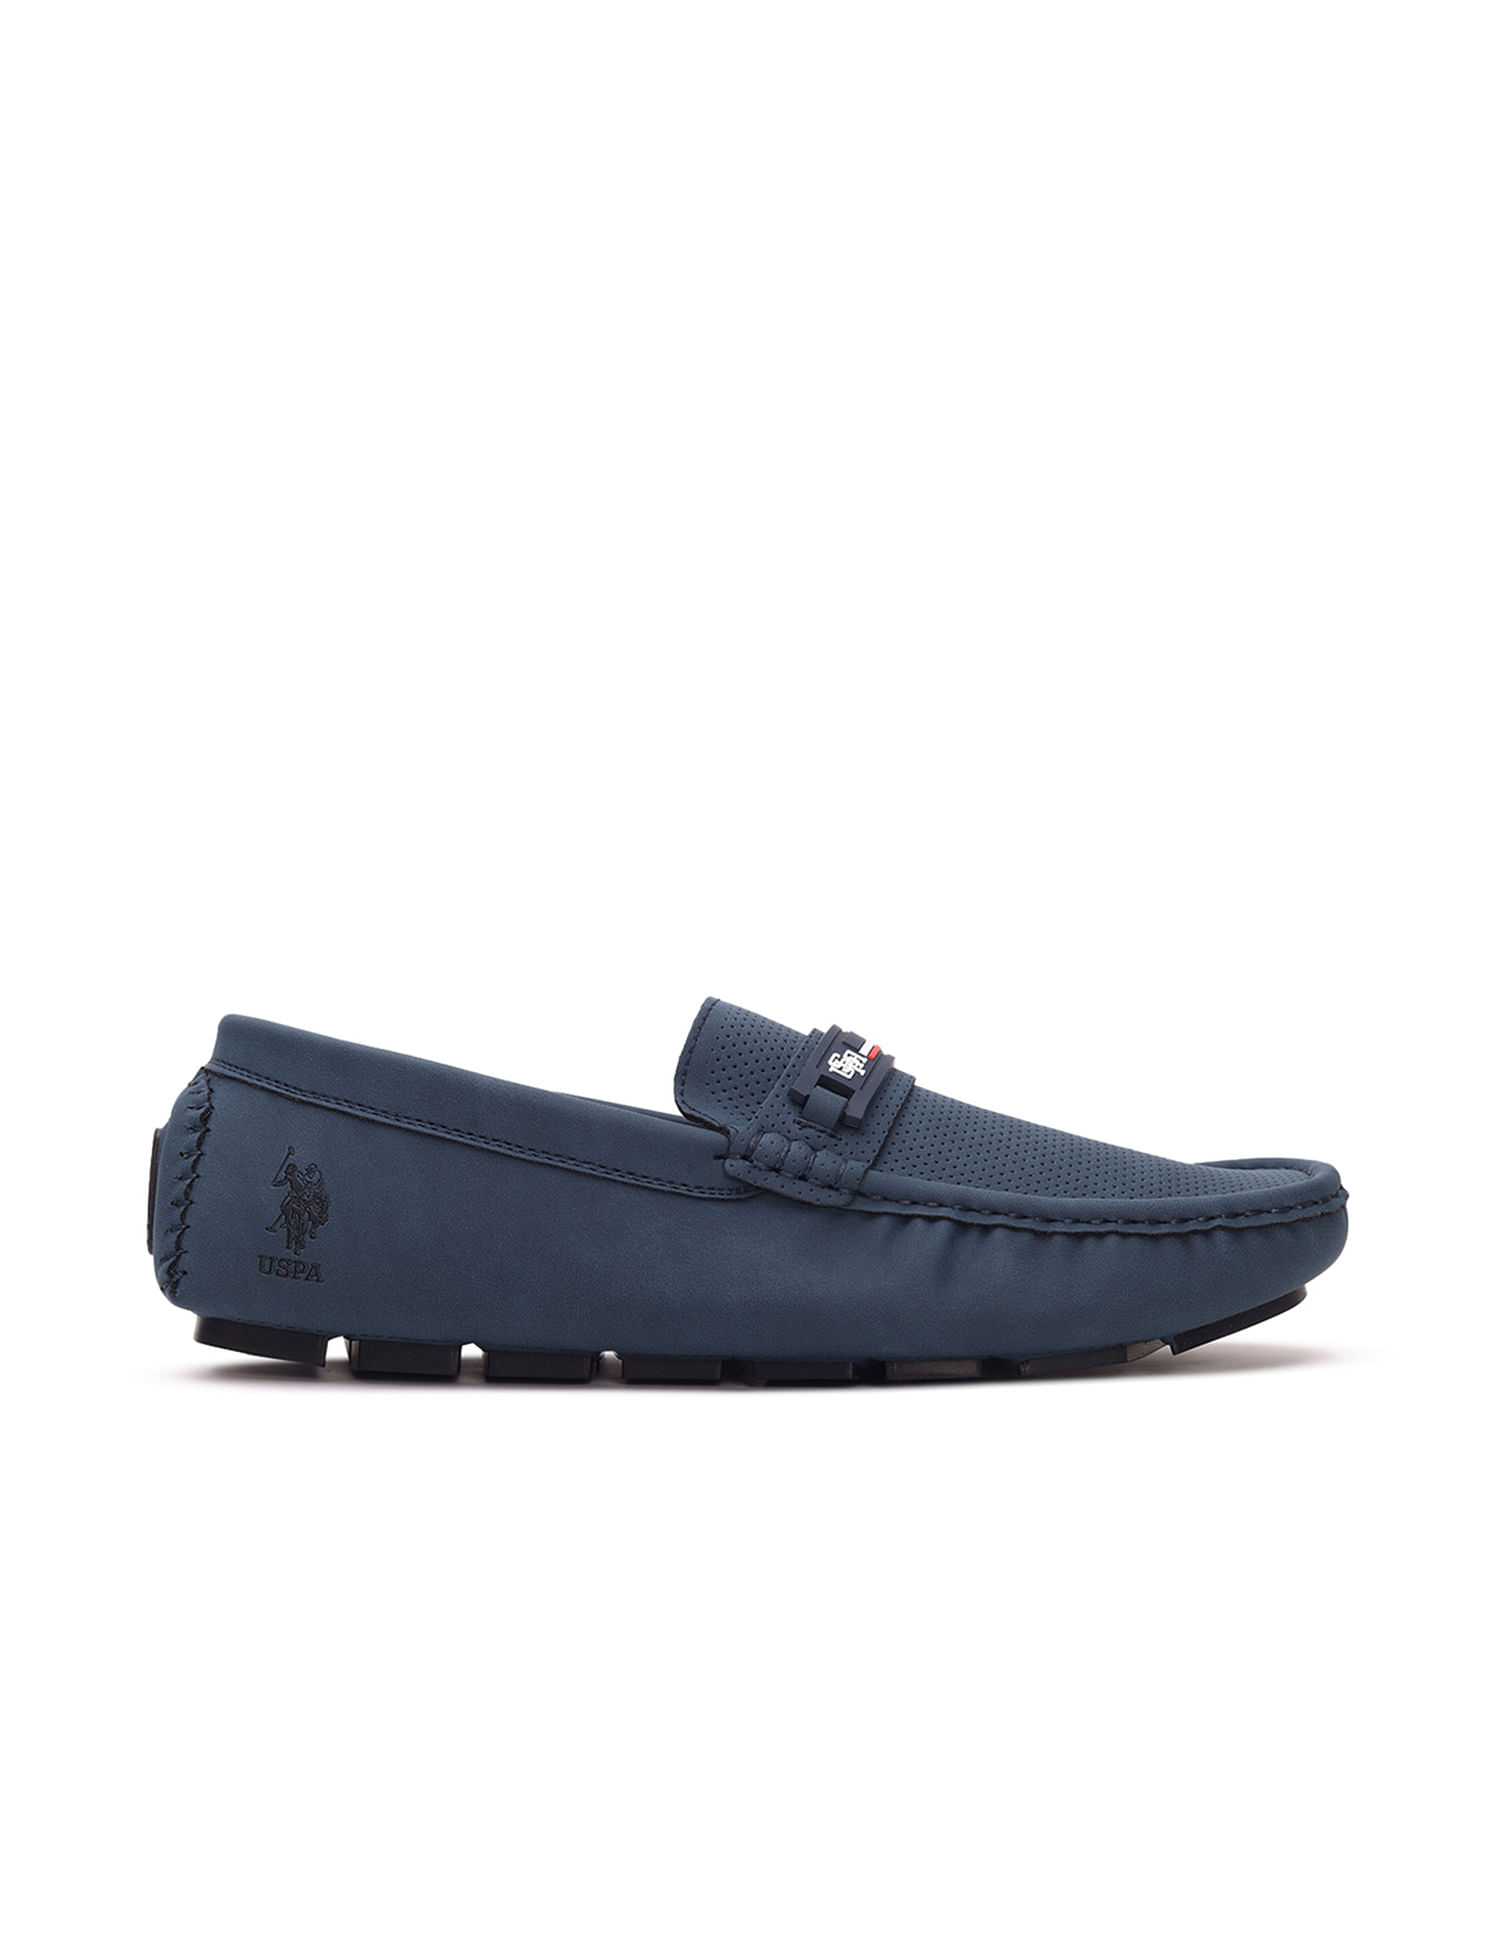 Buy U.S. Polo Assn. Men Round Toe Textured Barnes 2.0 Loafers - NNNOW.com